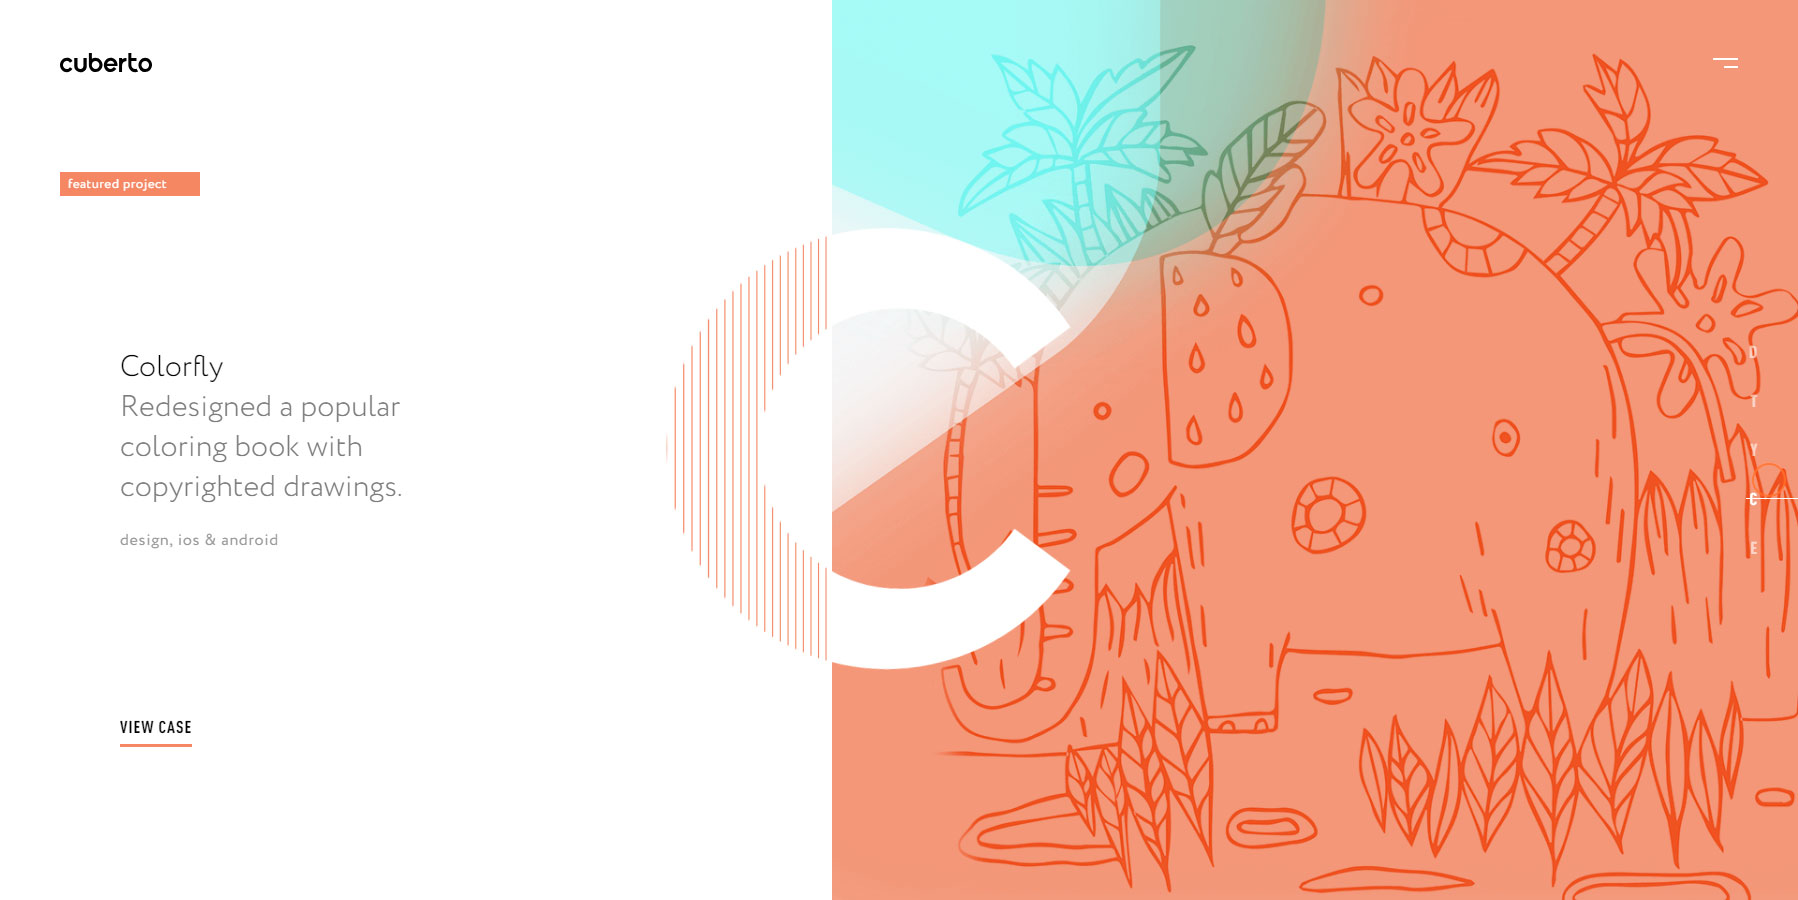 Cuberto - Website of the Day